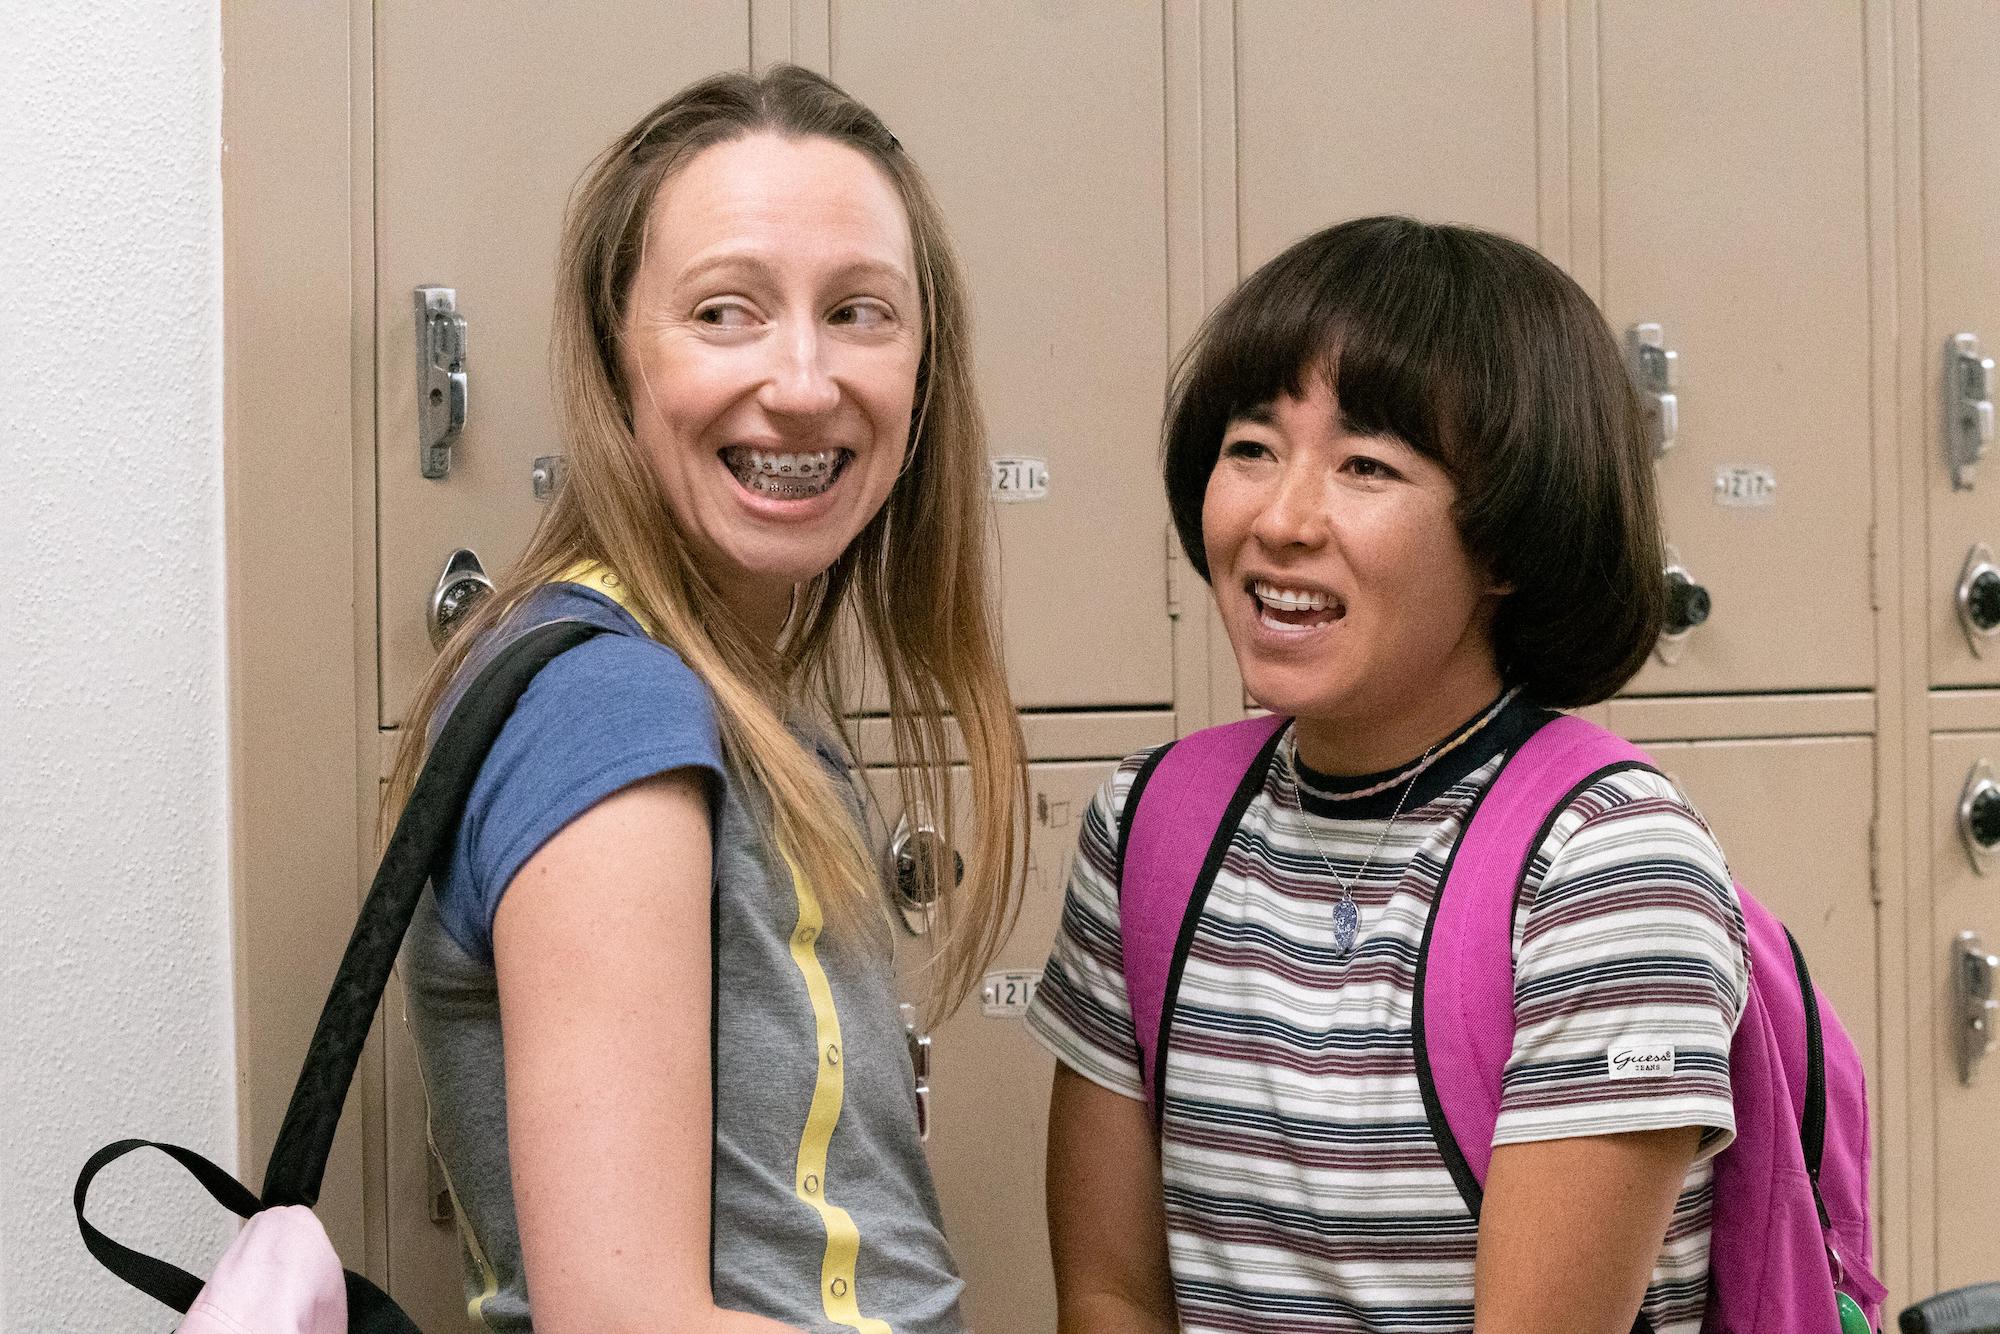 Anna Konkle and Maya Erskine smiling in a still from 'Pen15'